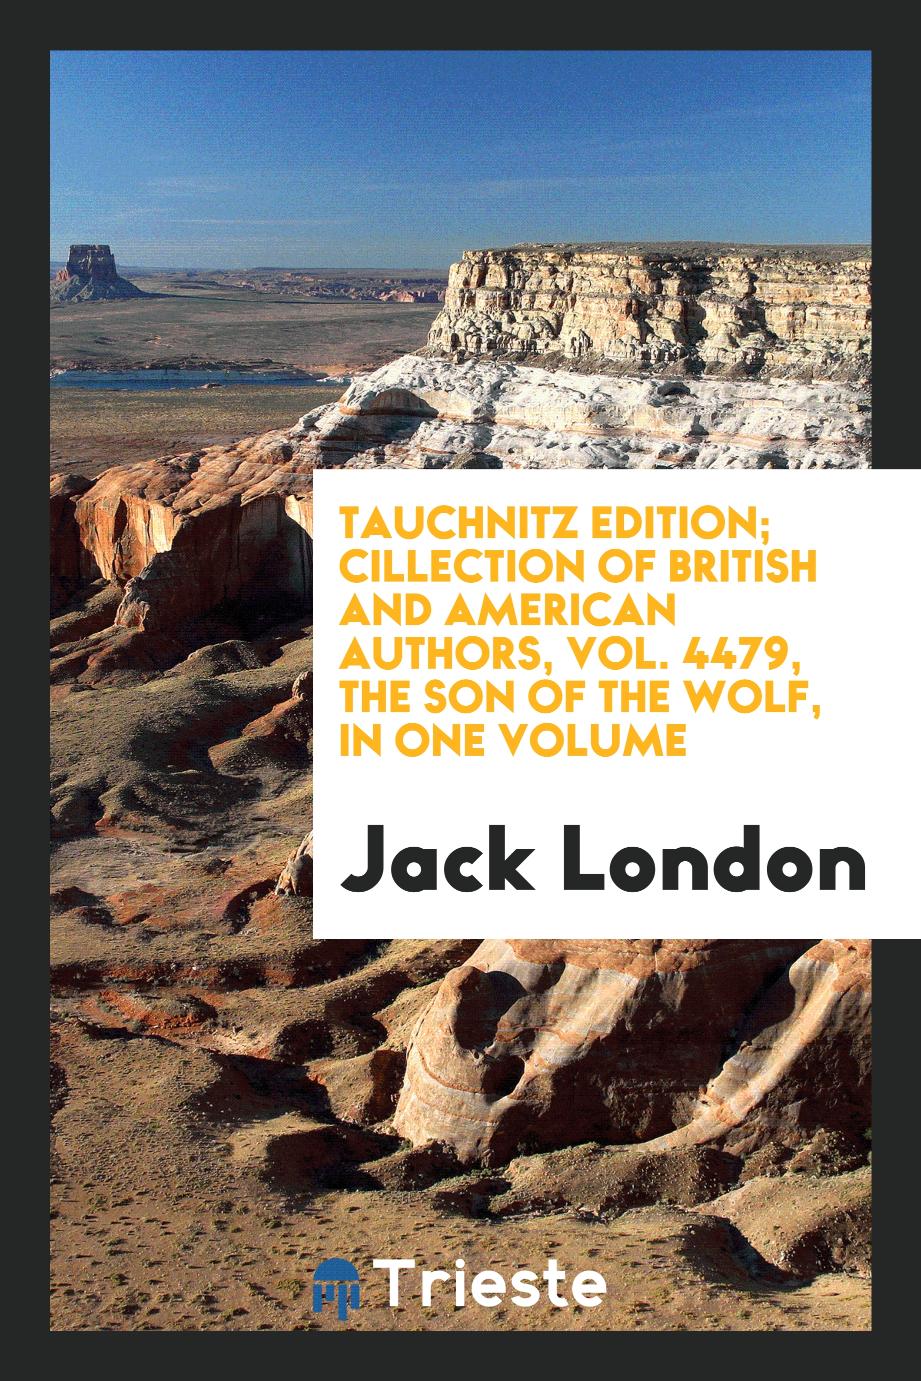 Tauchnitz edition; cillection of British and American authors, Vol. 4479, The son of the wolf, in one volume